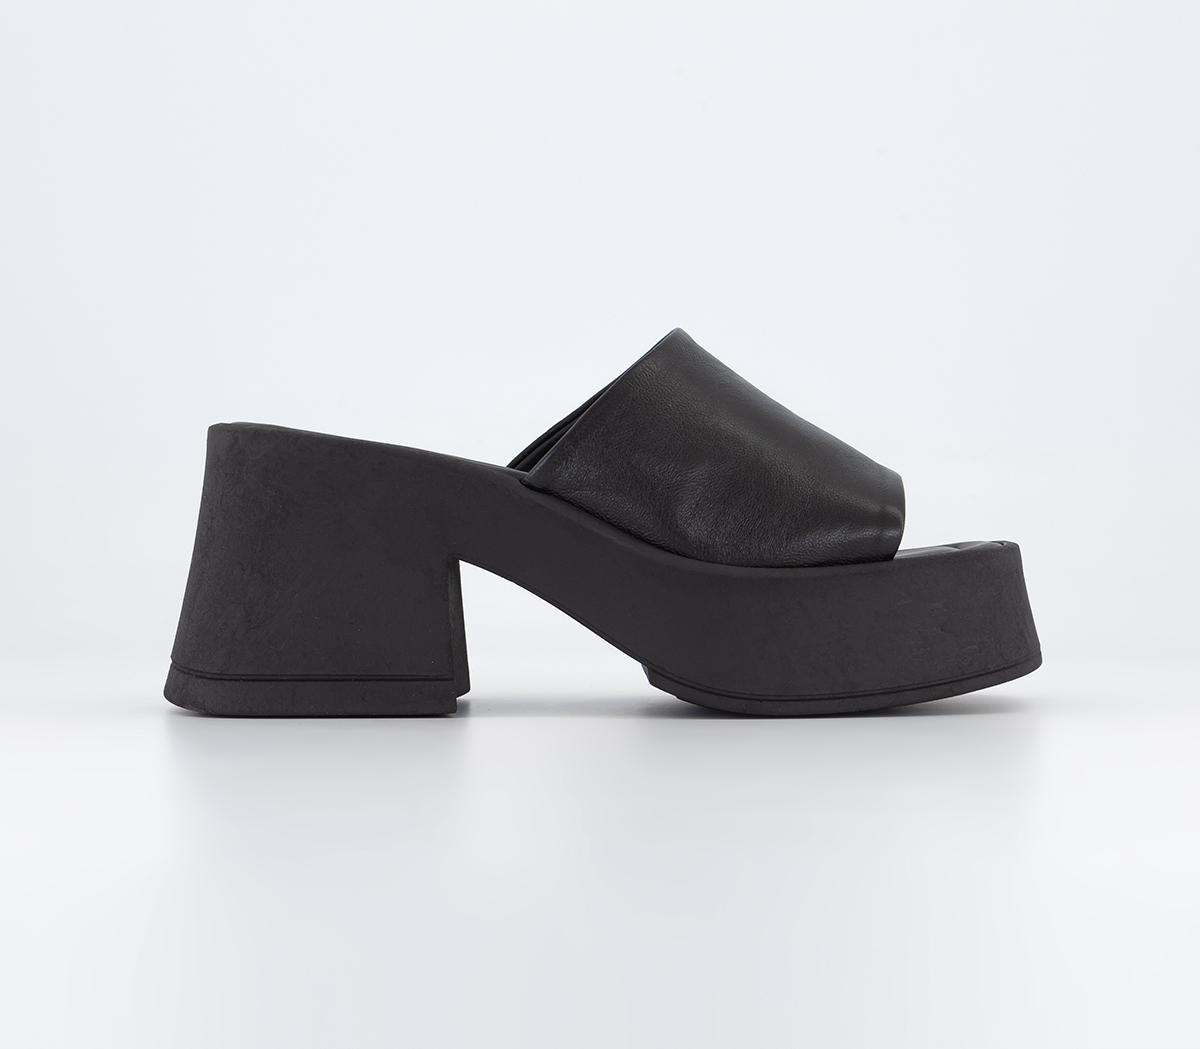 OFFICEHizzy Square Toe MulesBlack Leather